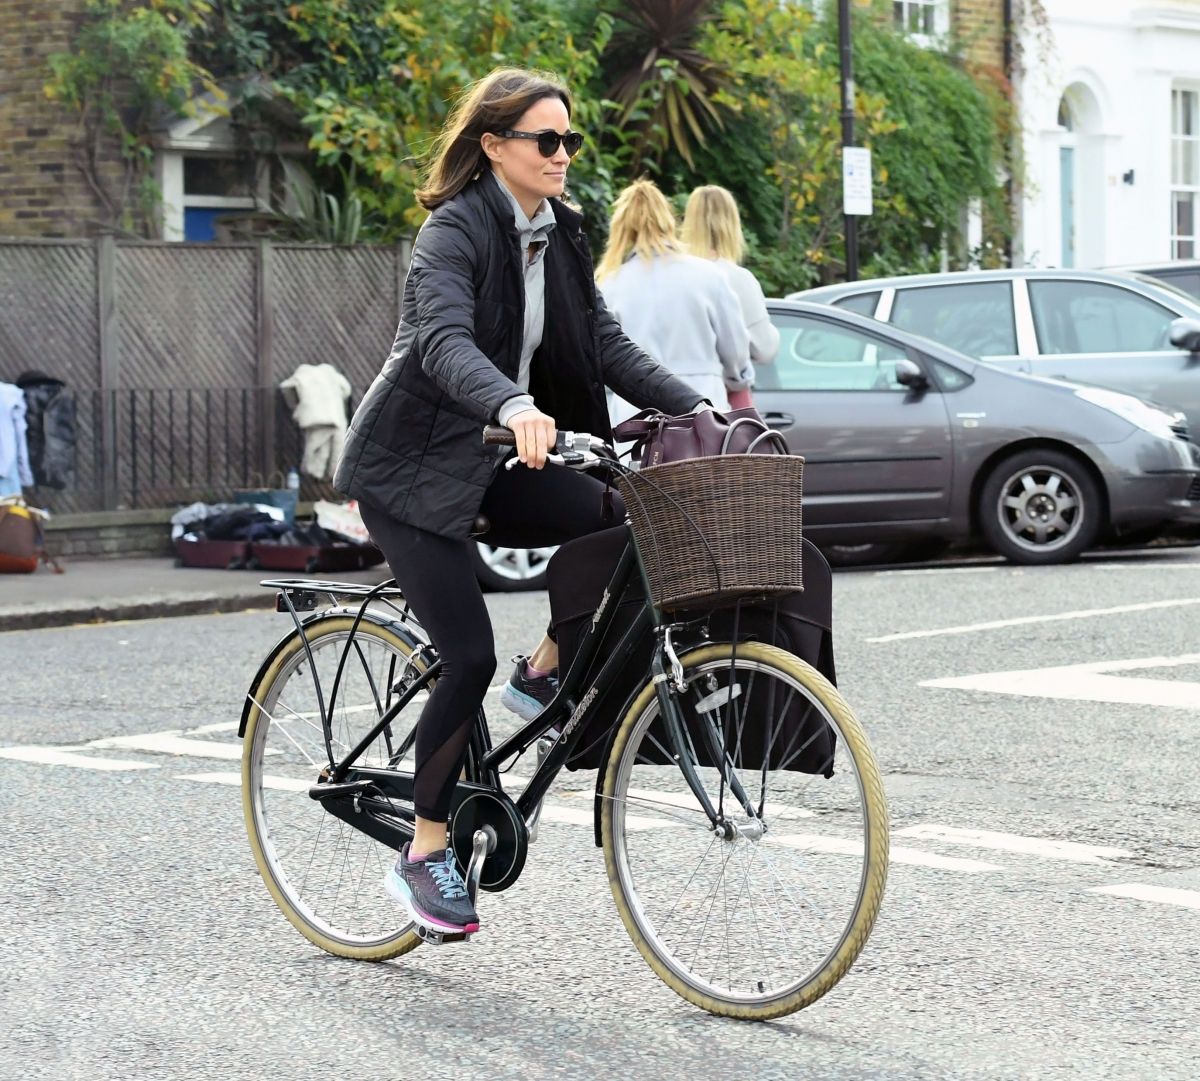 pippa-middleton-out-riding-a-bicycle-in-london-11-09-2017-2.jpg